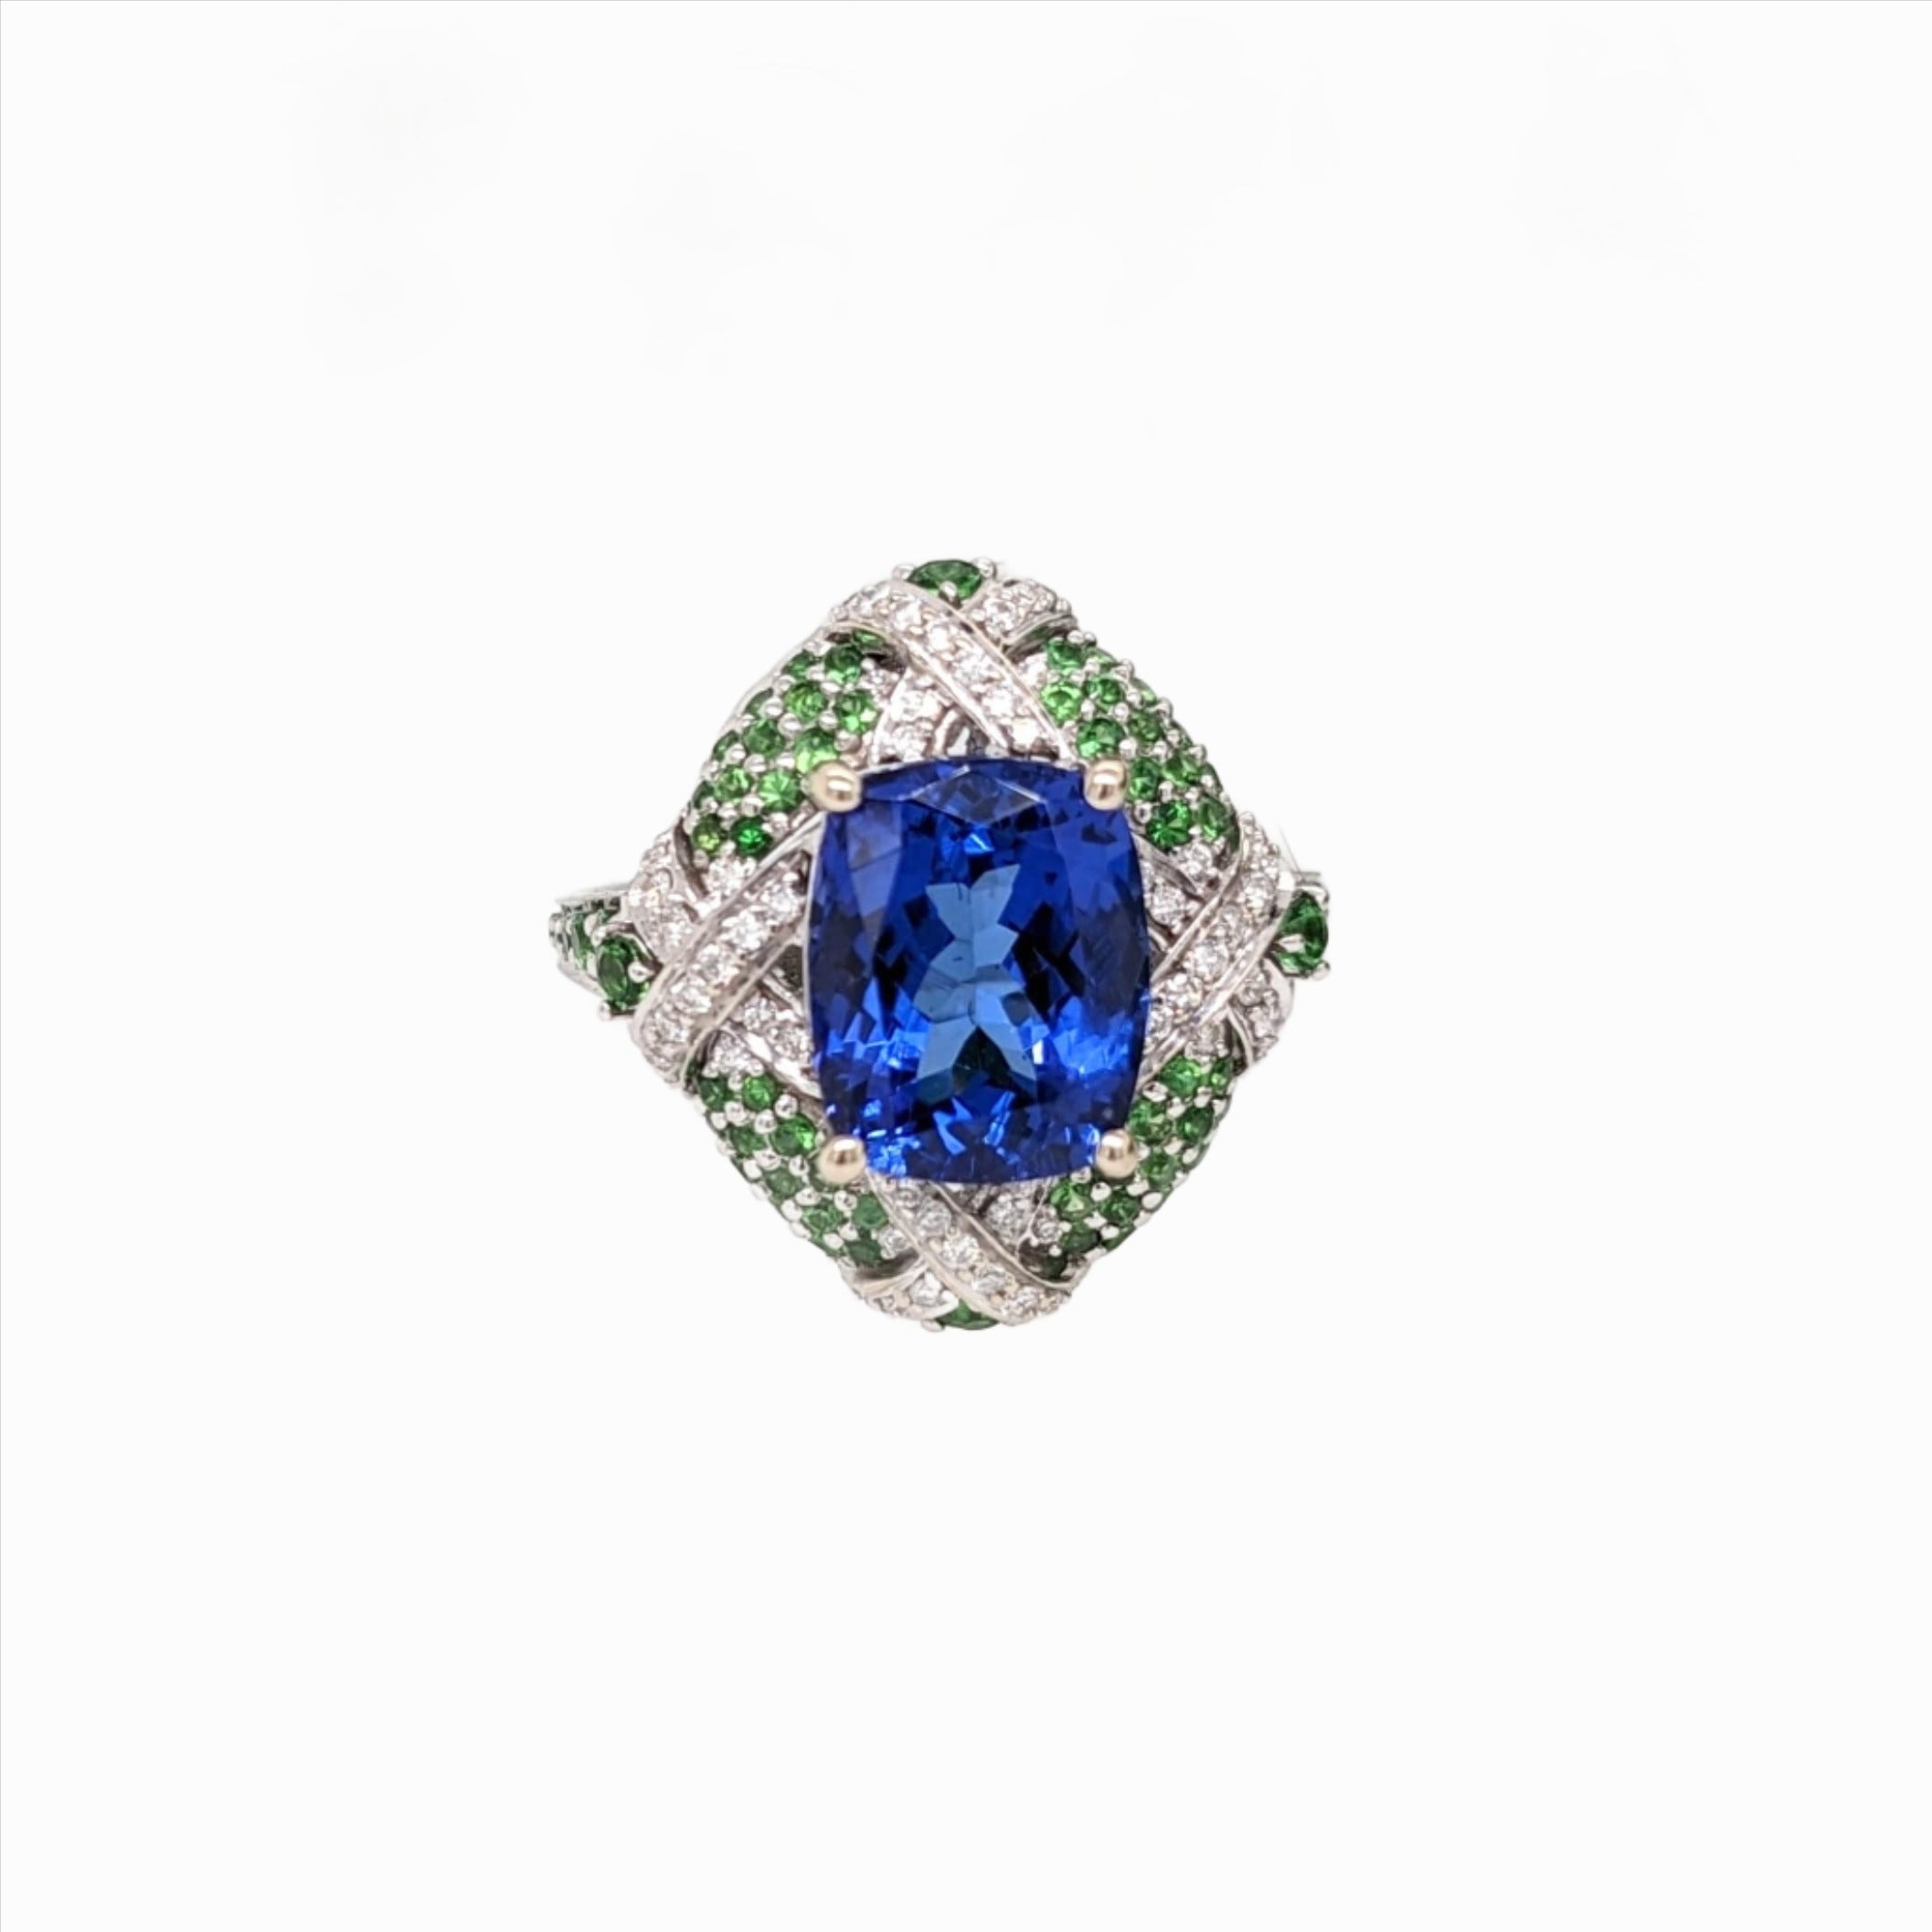 Gorgeous Tanzanite Ring w Natural Diamond and Tsavorite Accents in 14K Solid White Gold | Cushion 10x8mm | December Birthstone Ring